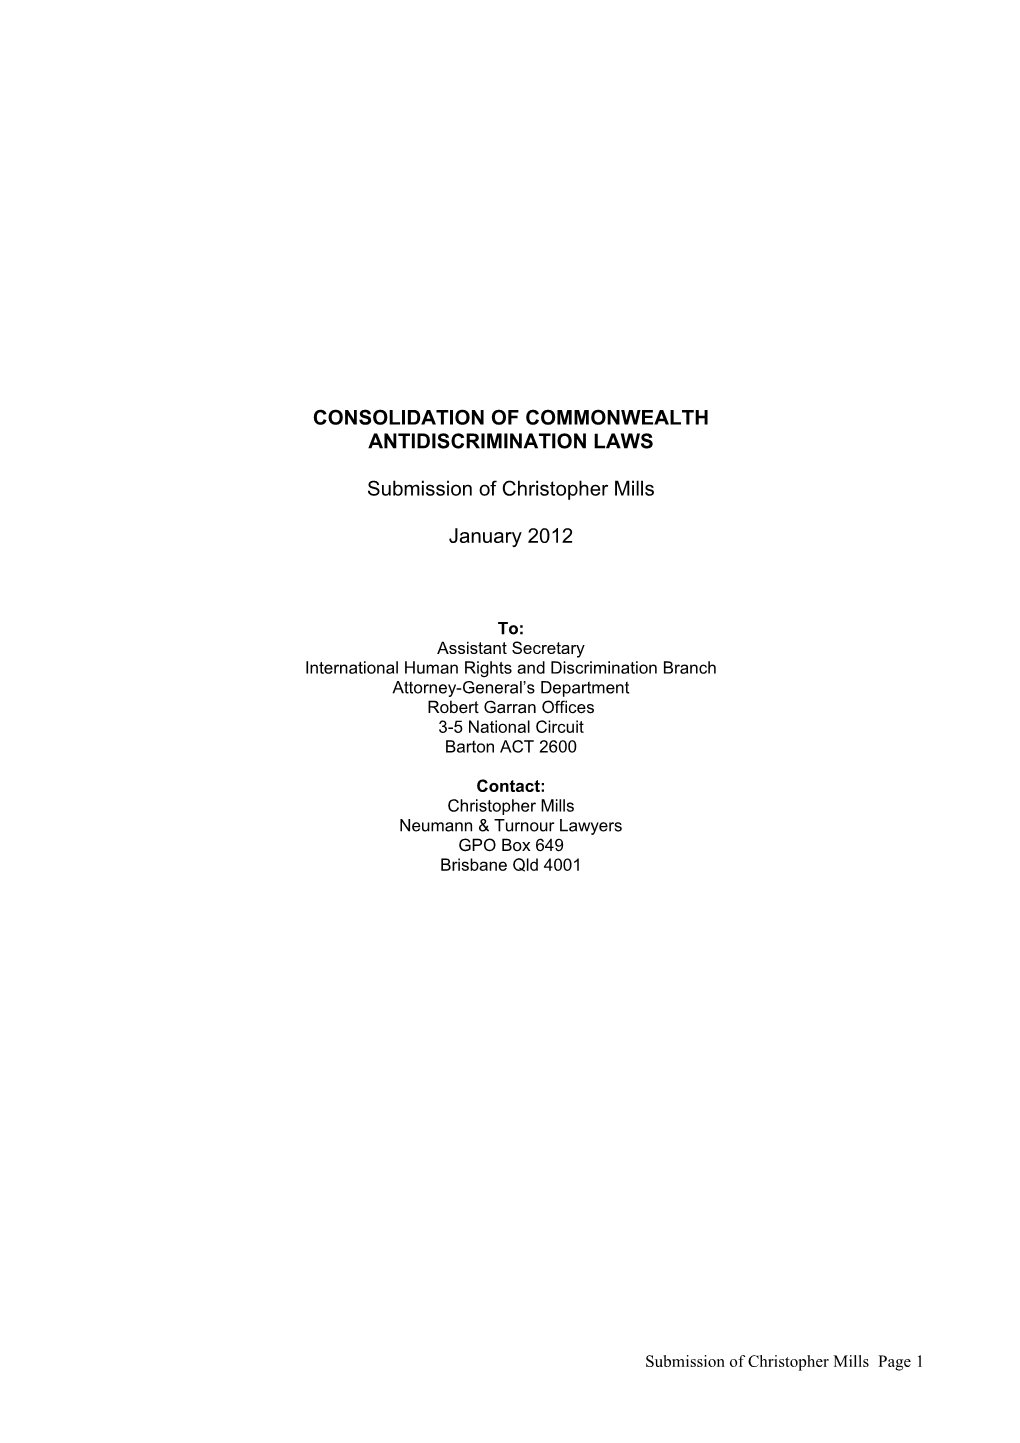 Submission on the Consolidation of Commonwealth Anti-Discrimination Laws - Chris Mills